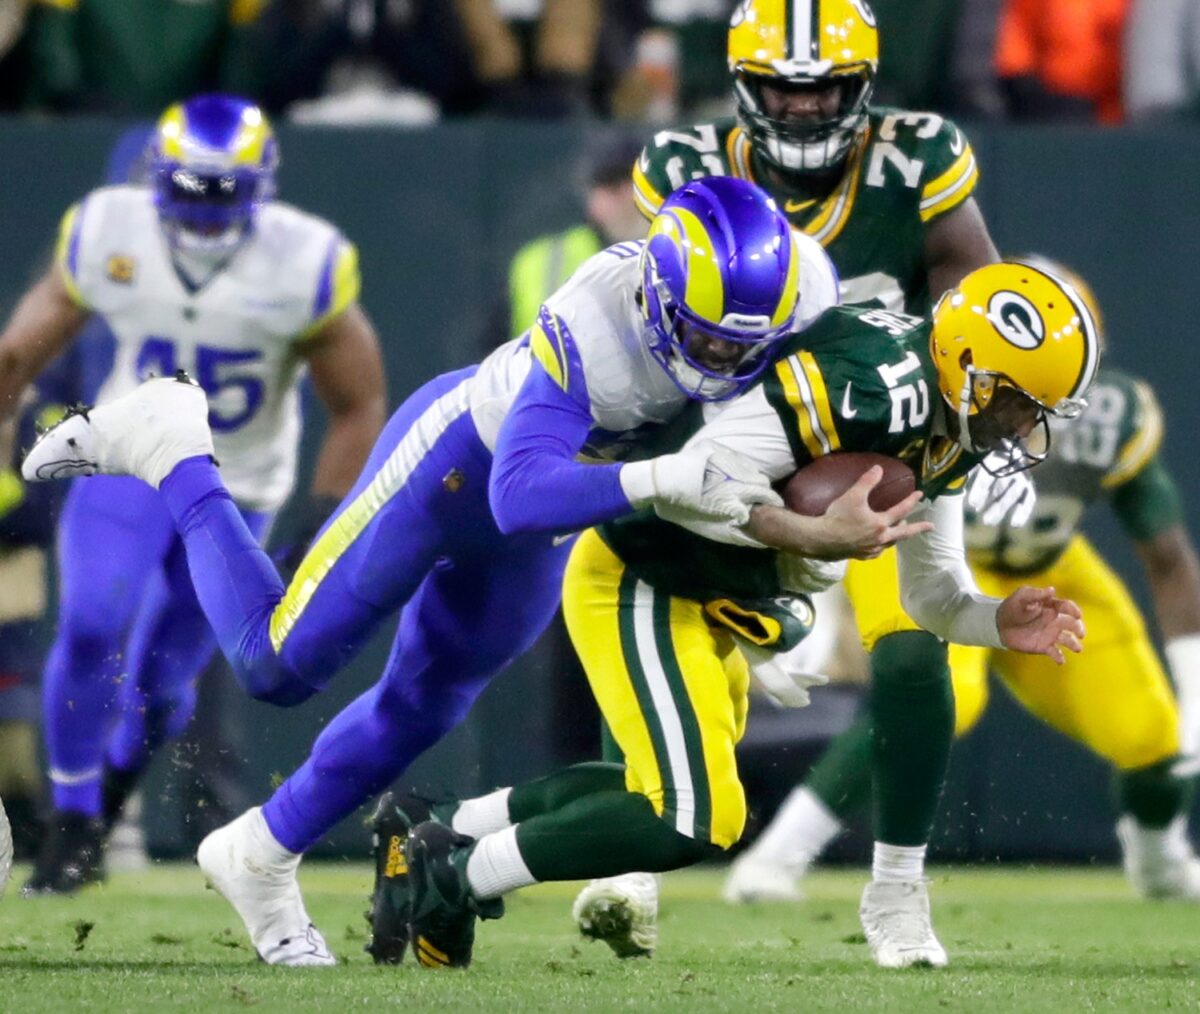 Los Angeles Rams linebacker Leonard Floyd (54) sacks Green Bay Packers quarterback Aaron Rodgers (12) during their football game on Monday December, 19, 2022 at Lambeau Field in Green Bay, Wis. Wm. Glasheen USA TODAY NETWORK-Wisconsin Apc Packers Vs Rams 81655 121922 Wag